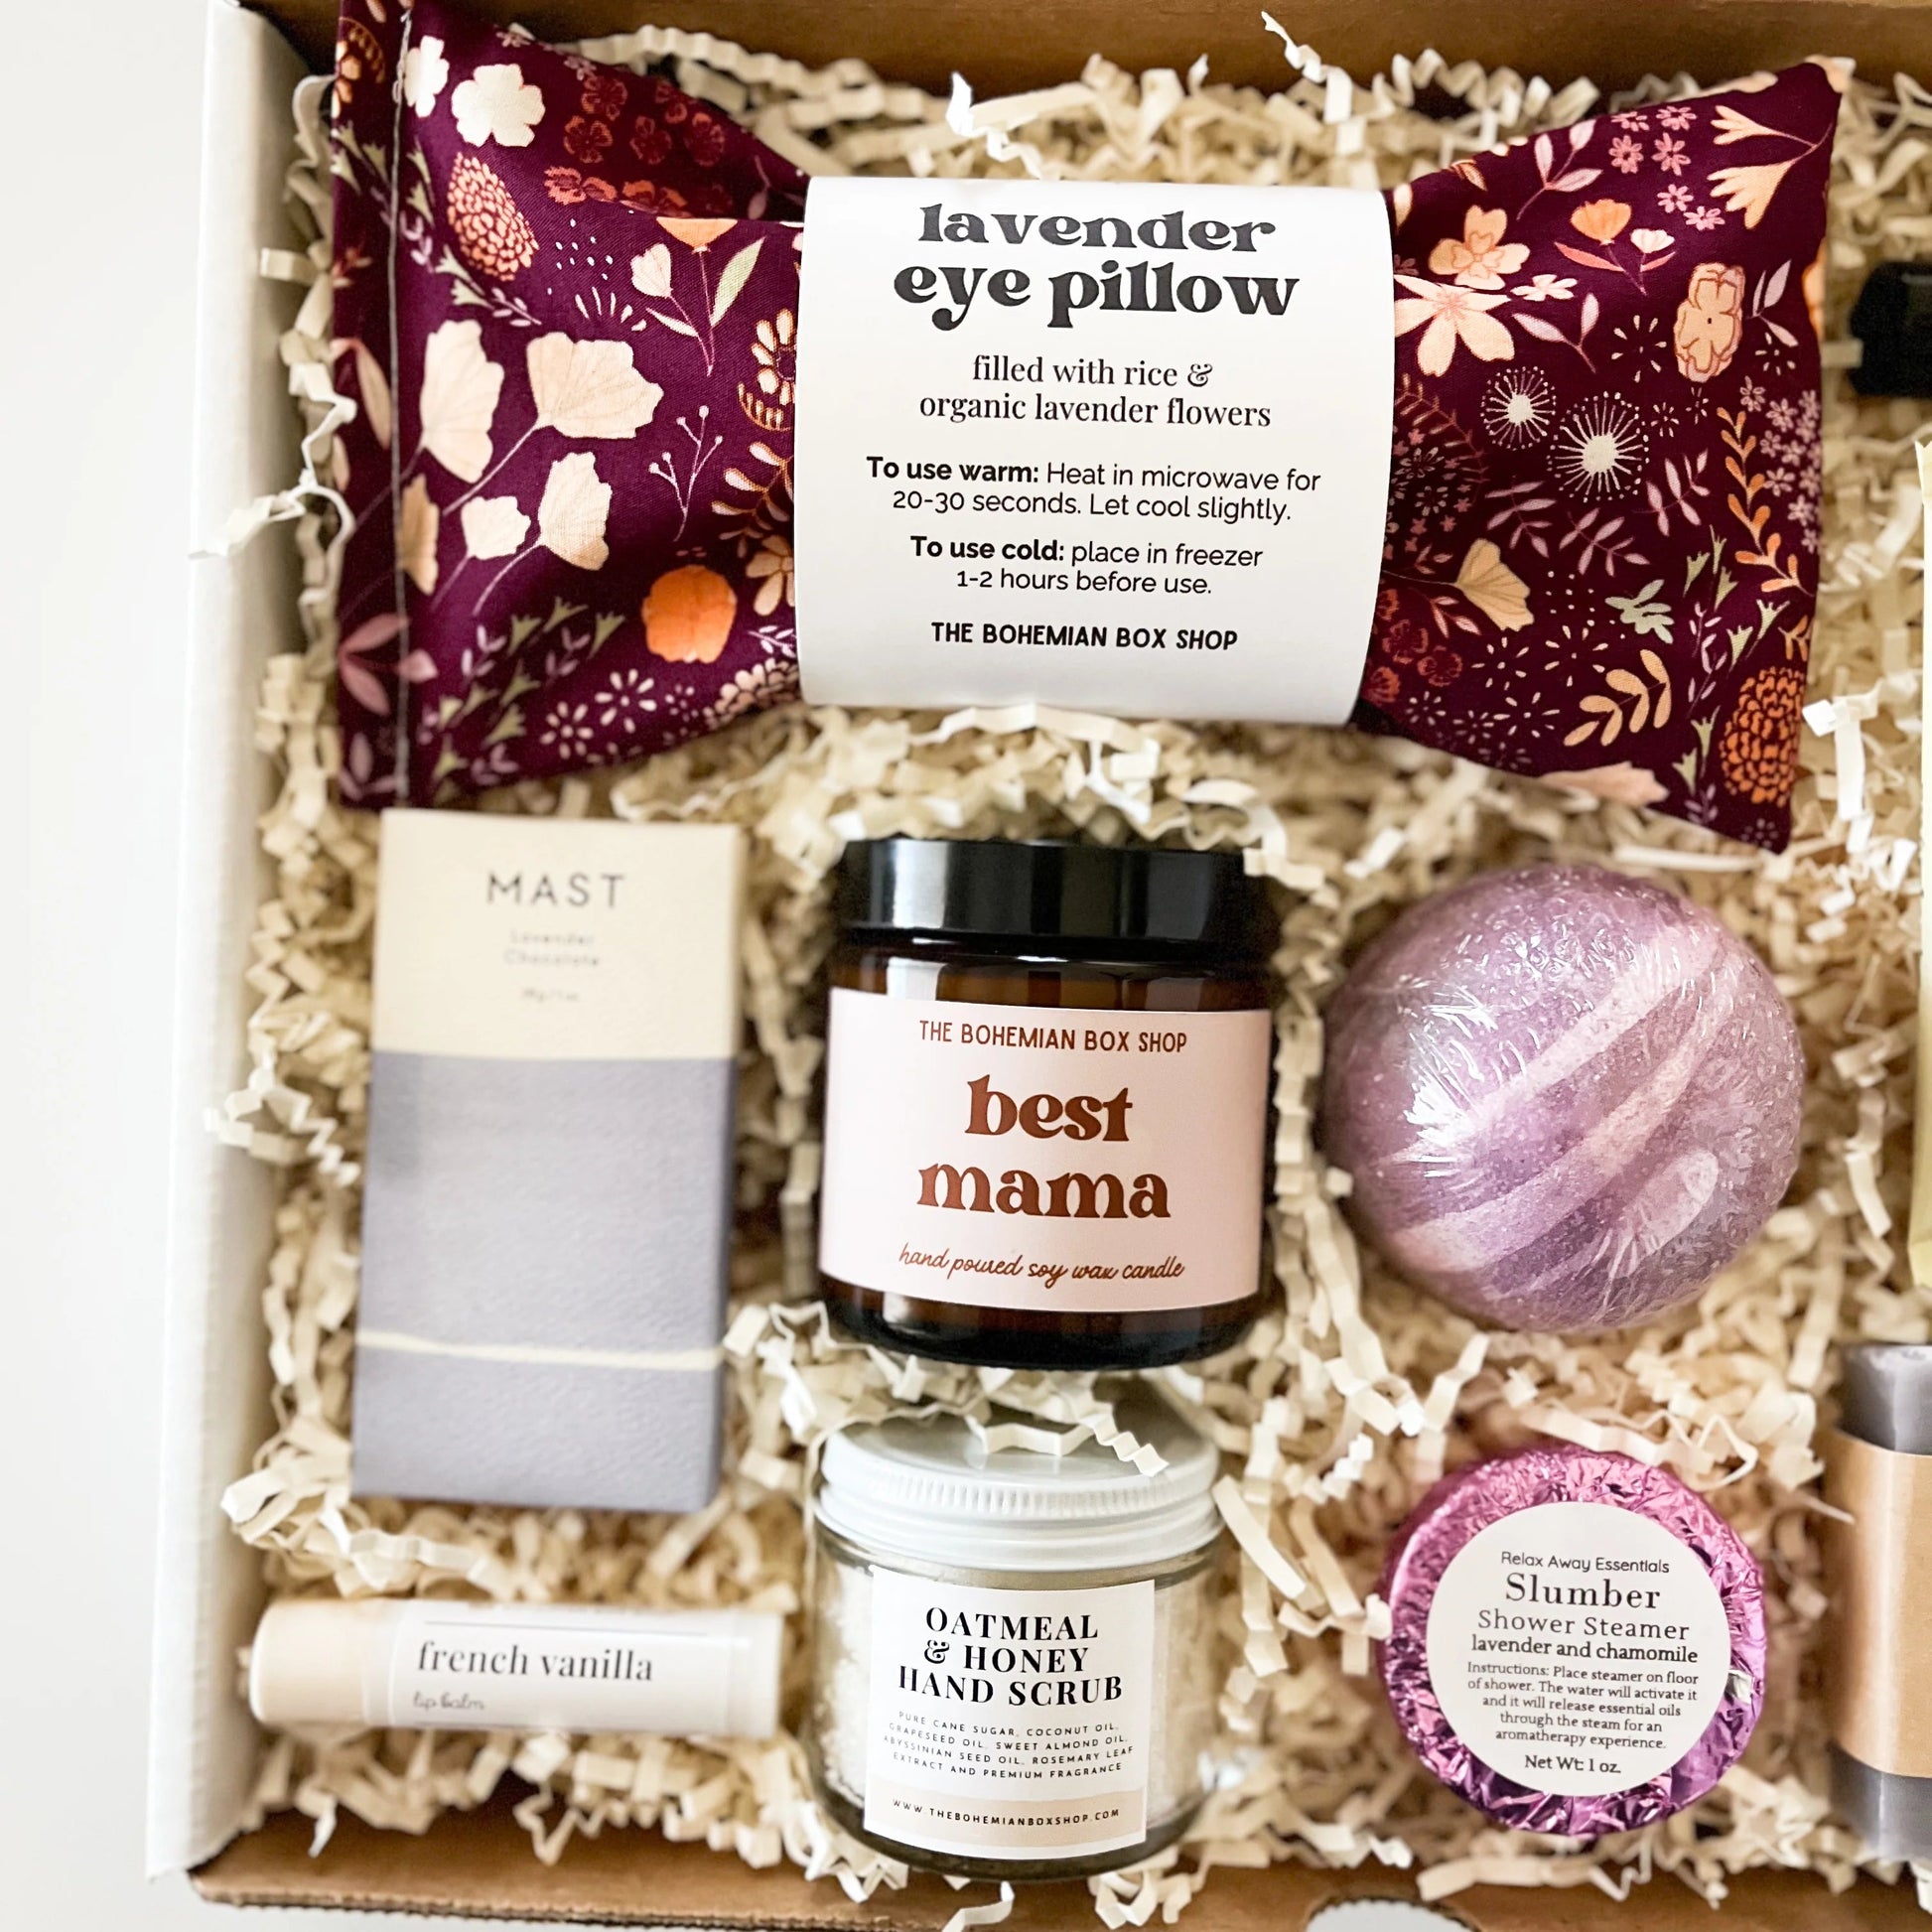 Care package for any Mom. Contains lavender eye pillow, chocolate bar, French vanilla lip balm, best mama soy candle, hand scrub, bath bomb, shower steamer, tea packets, relax roller bottle, and lavender soap. 